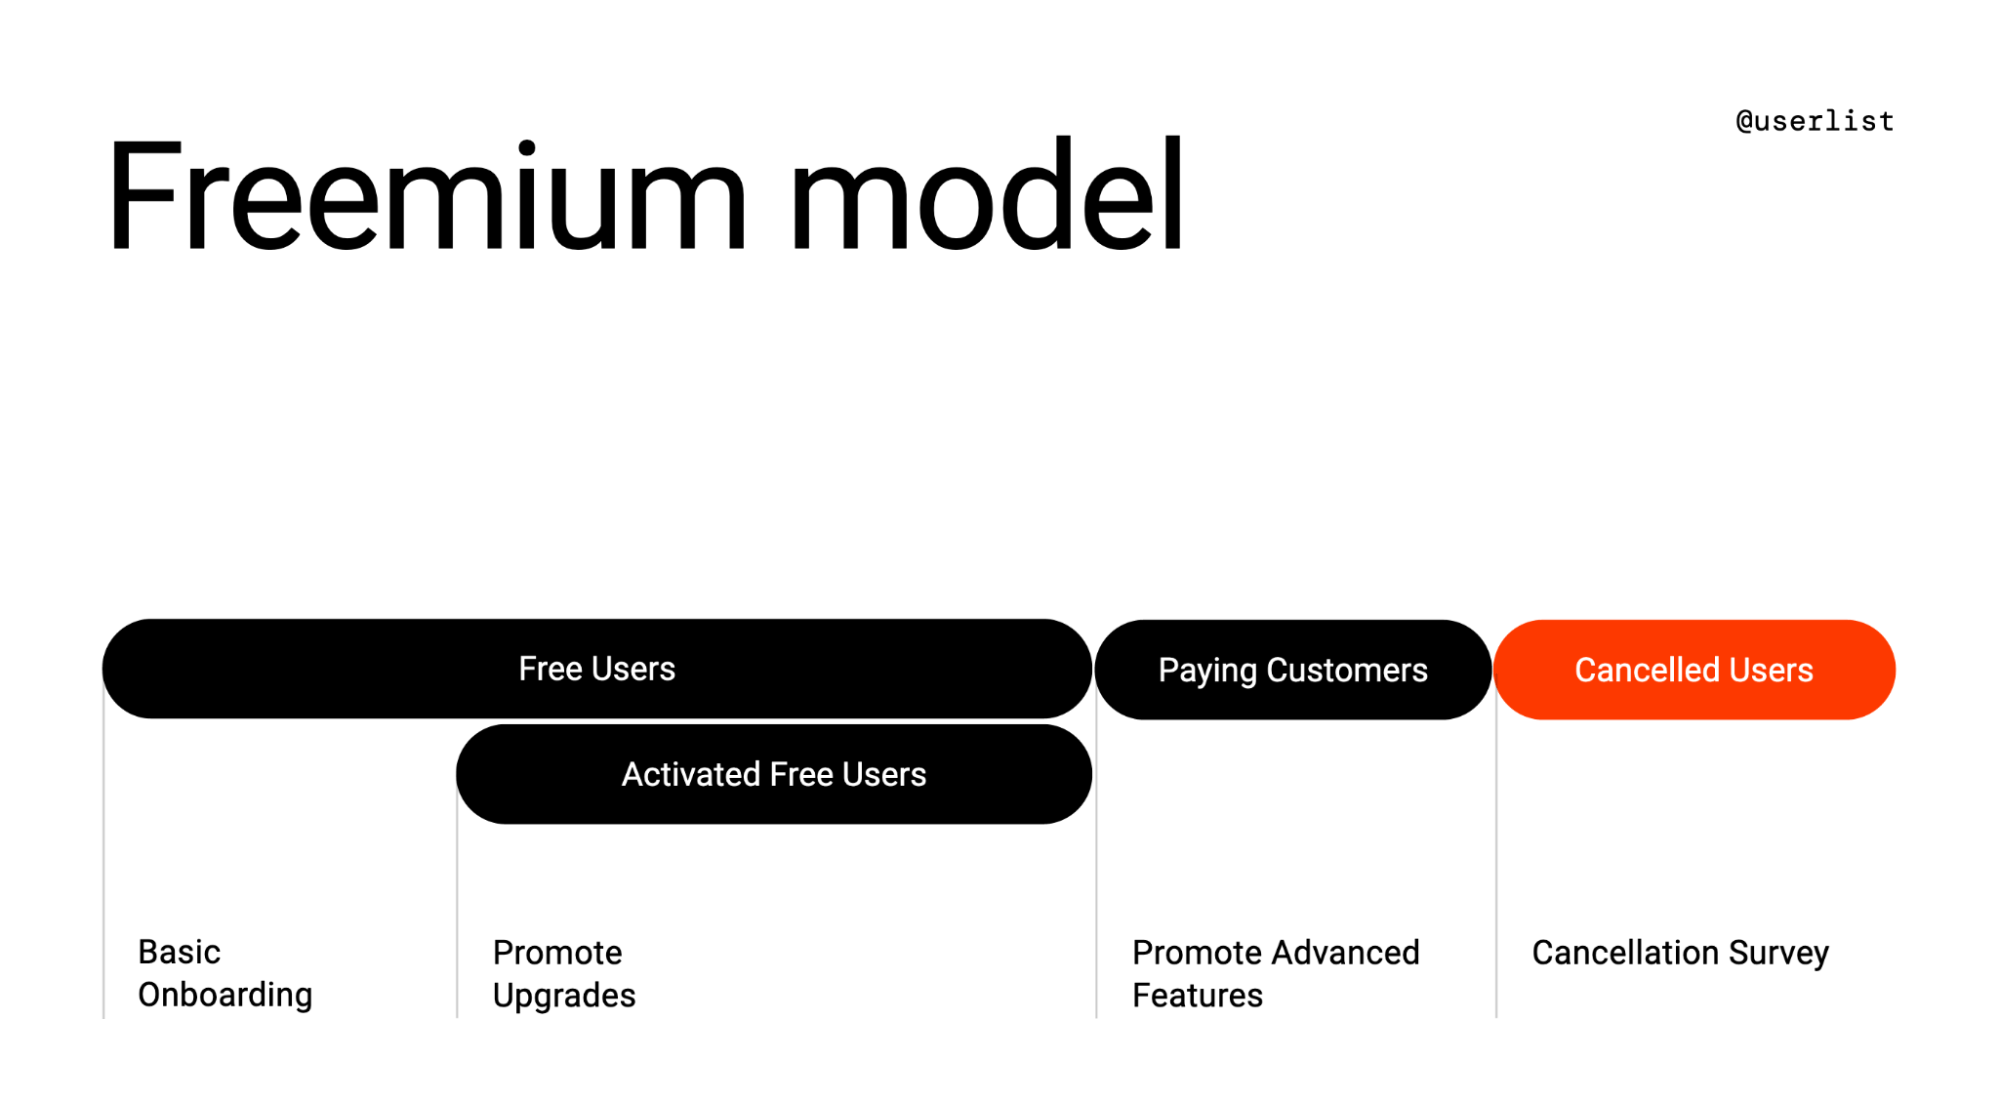 SaaS User Onboarding Guide: A segments map showing the freemium model